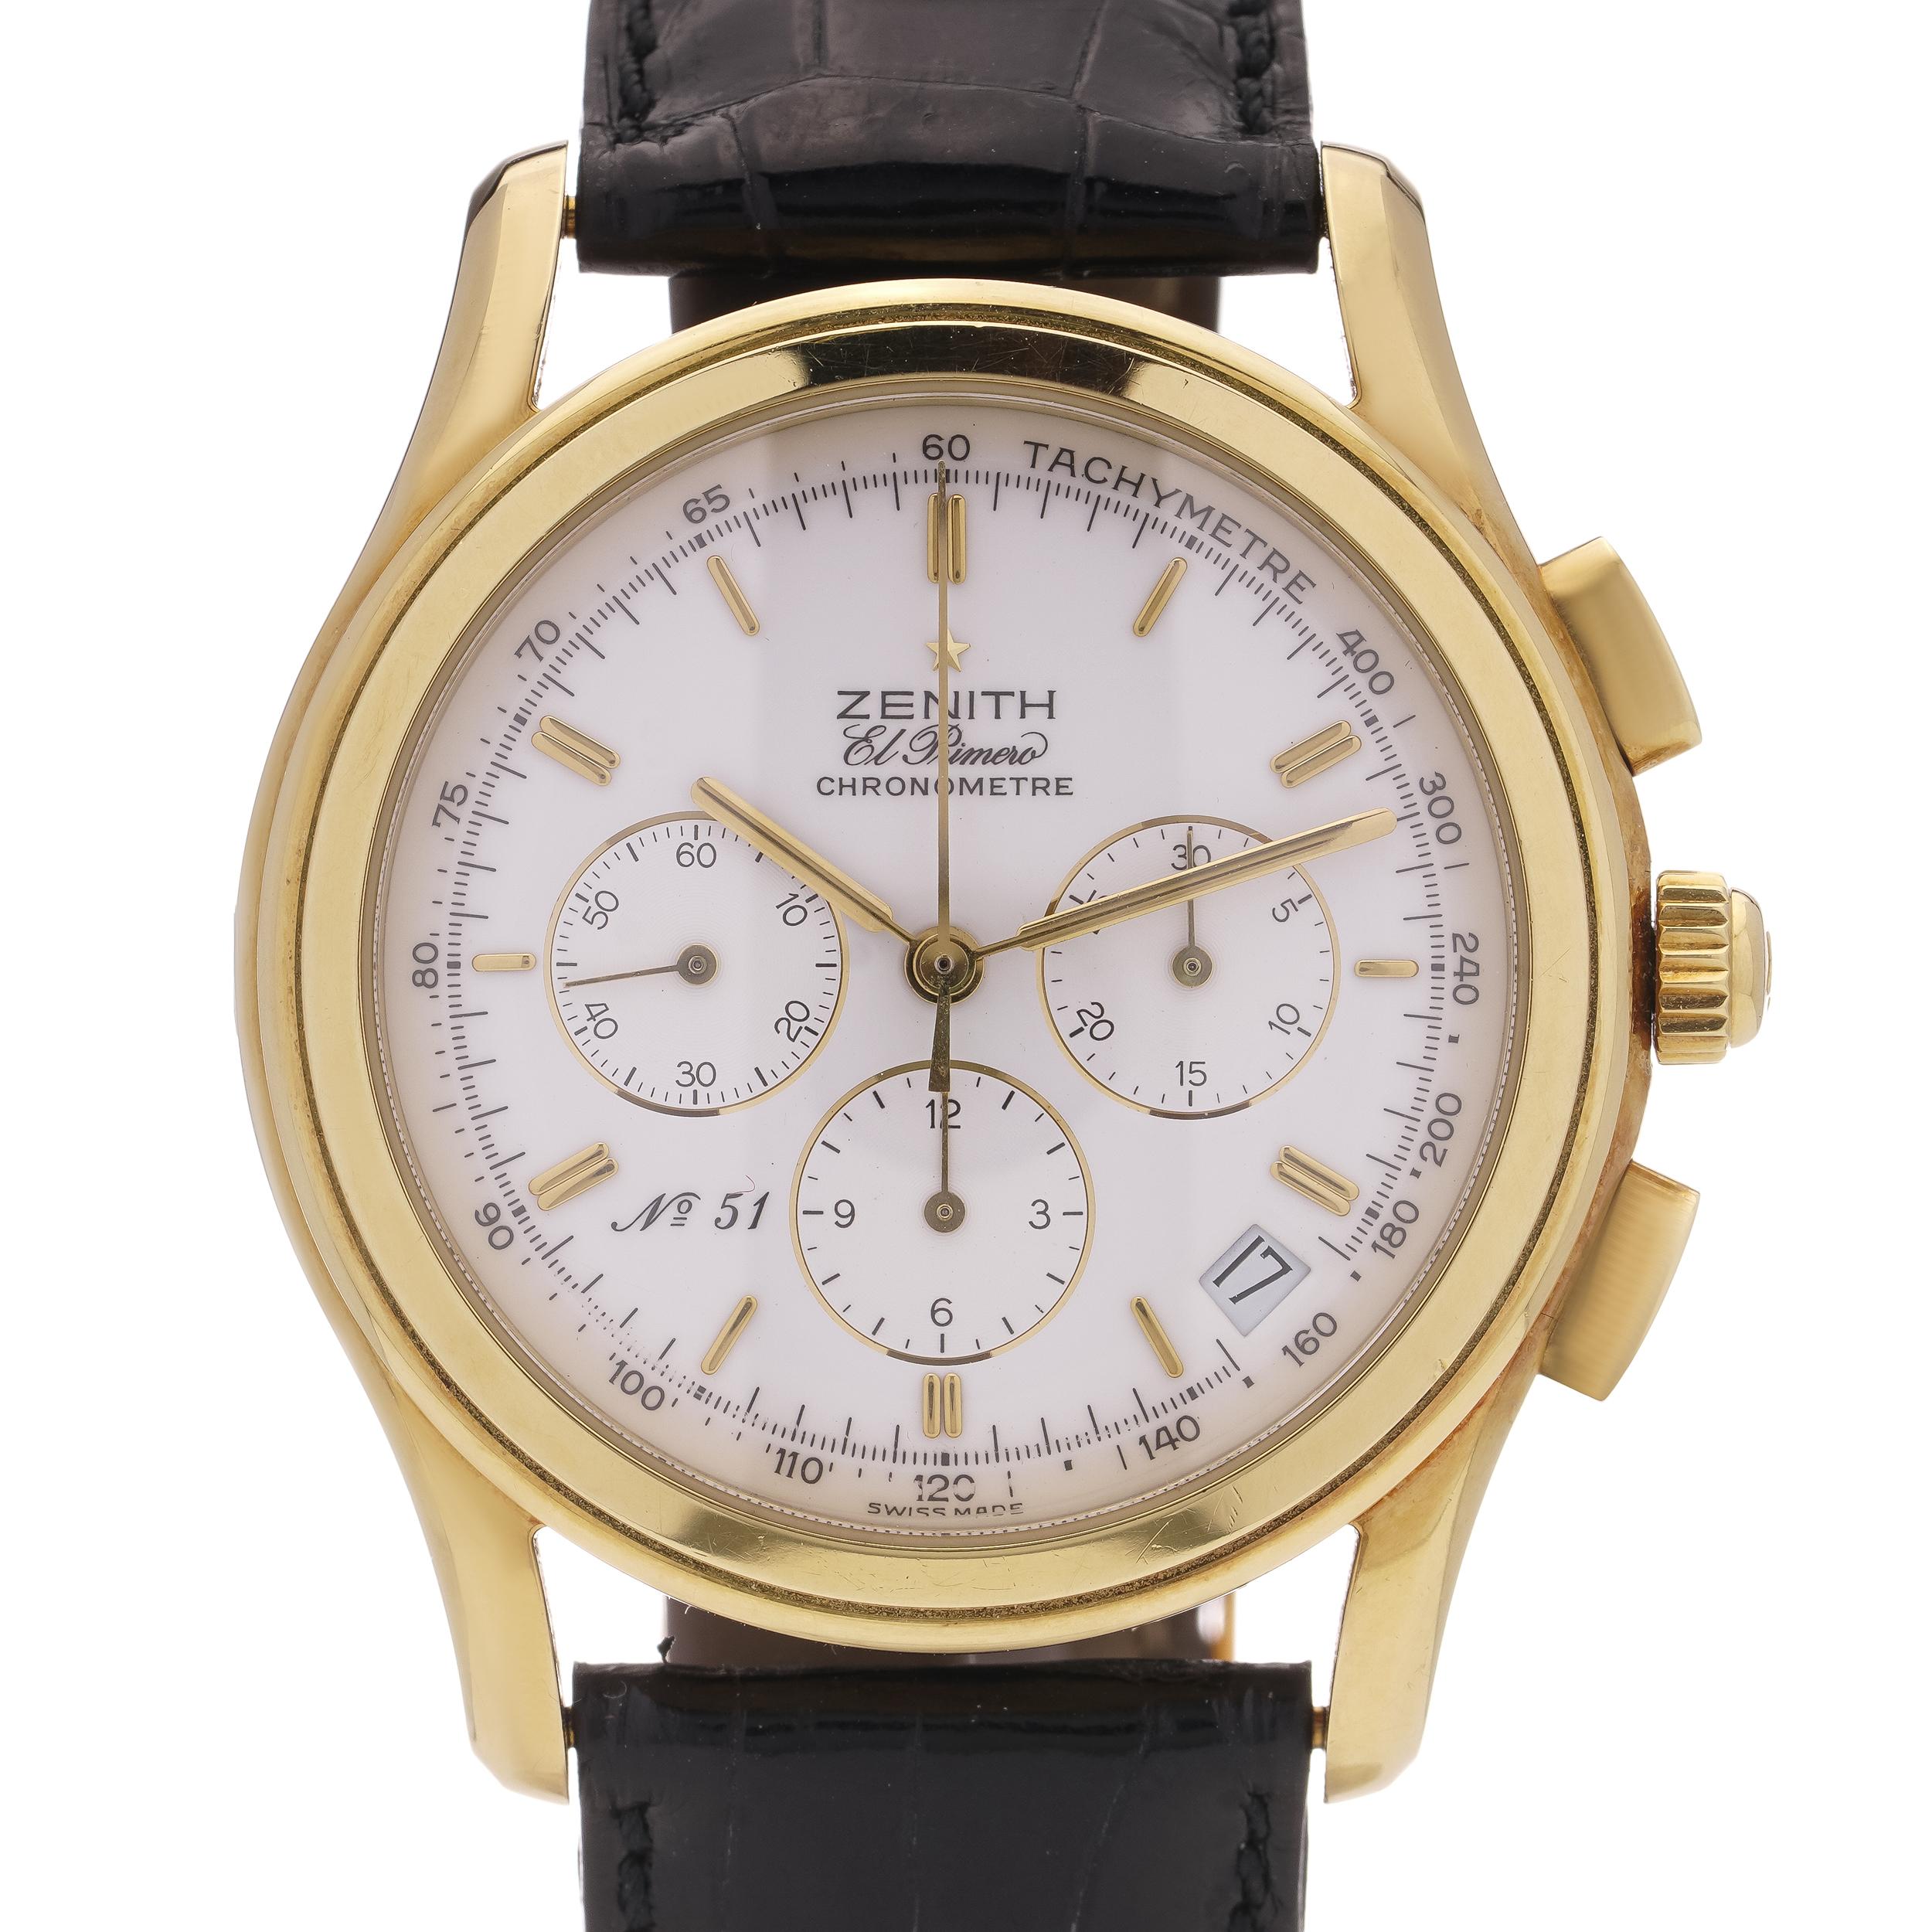 Zenith El Primero 18kt. yellow gold vintage Limited Edition 51/900 , Ref 30.0220 400  automatic calendar chronograph wristwatch.

The timepiece features a pristine white dial adorned with raised gilt baton hour markers, complemented by a black outer